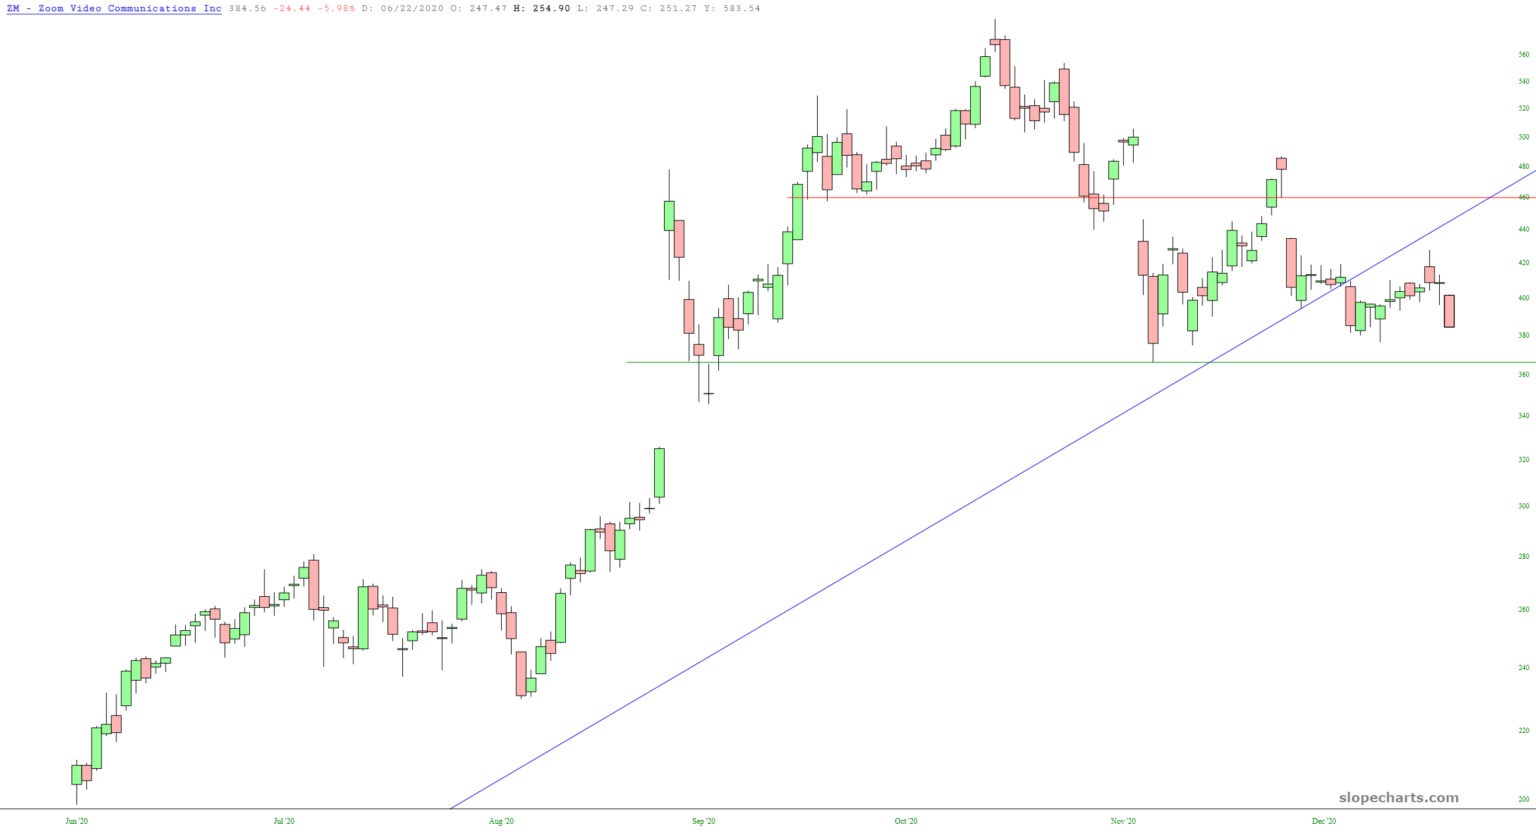 Zoom Video Communications Daily Chart.